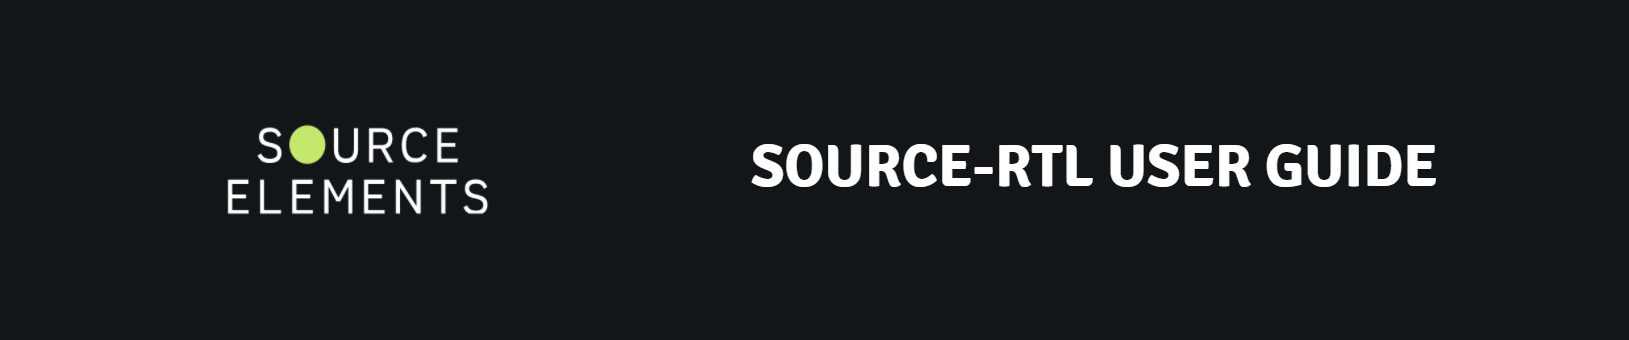 Source-RTL User Guide